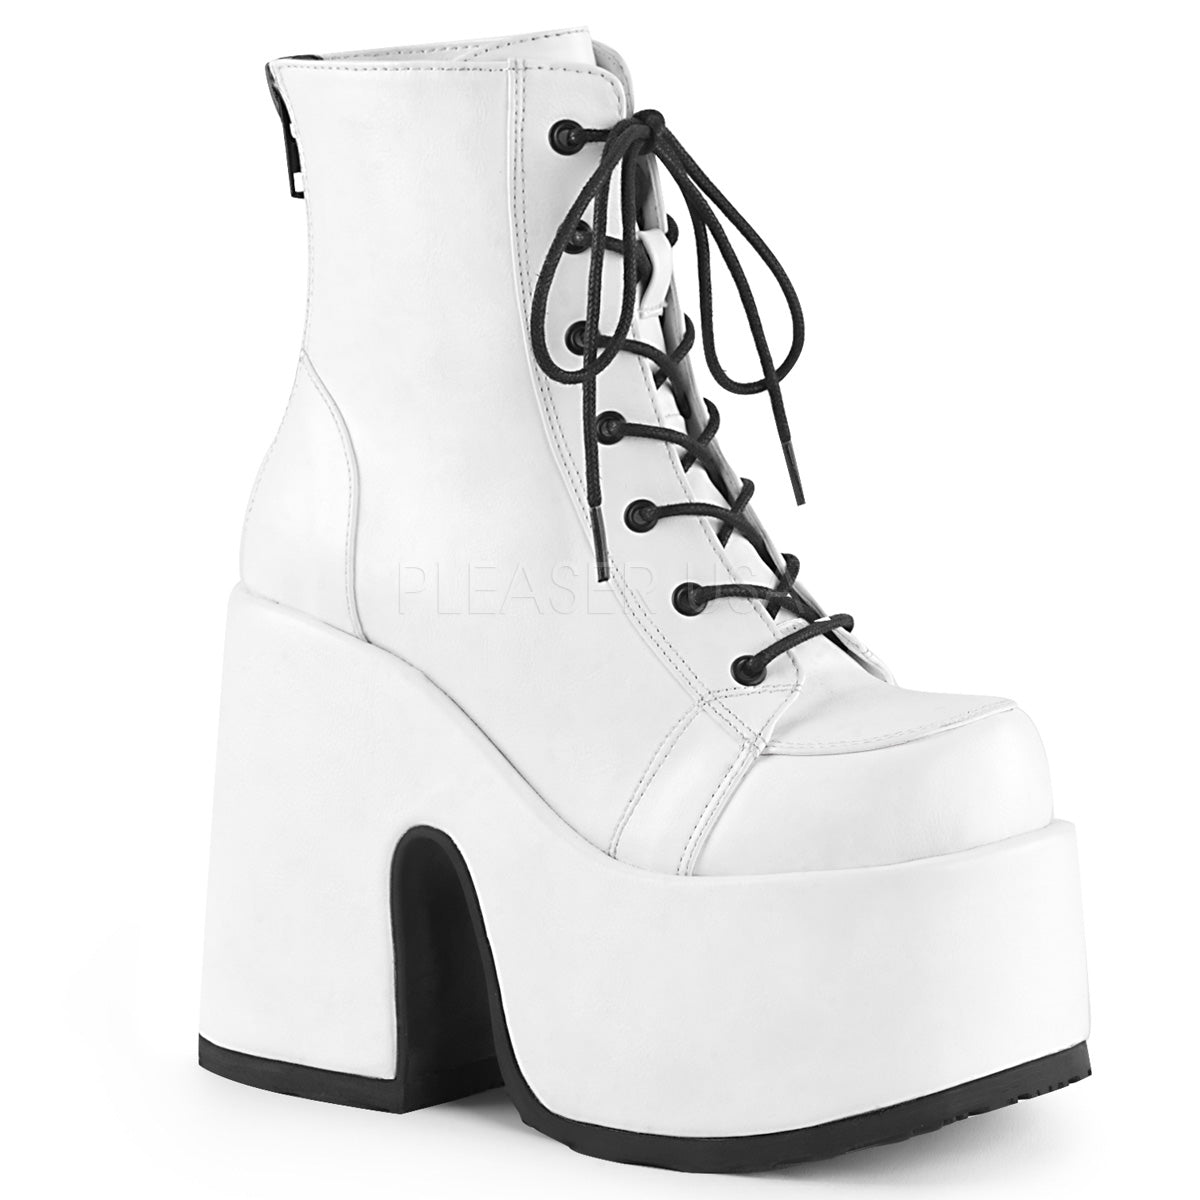 Demonia Camel 203 White - Model Express VancouverBoots